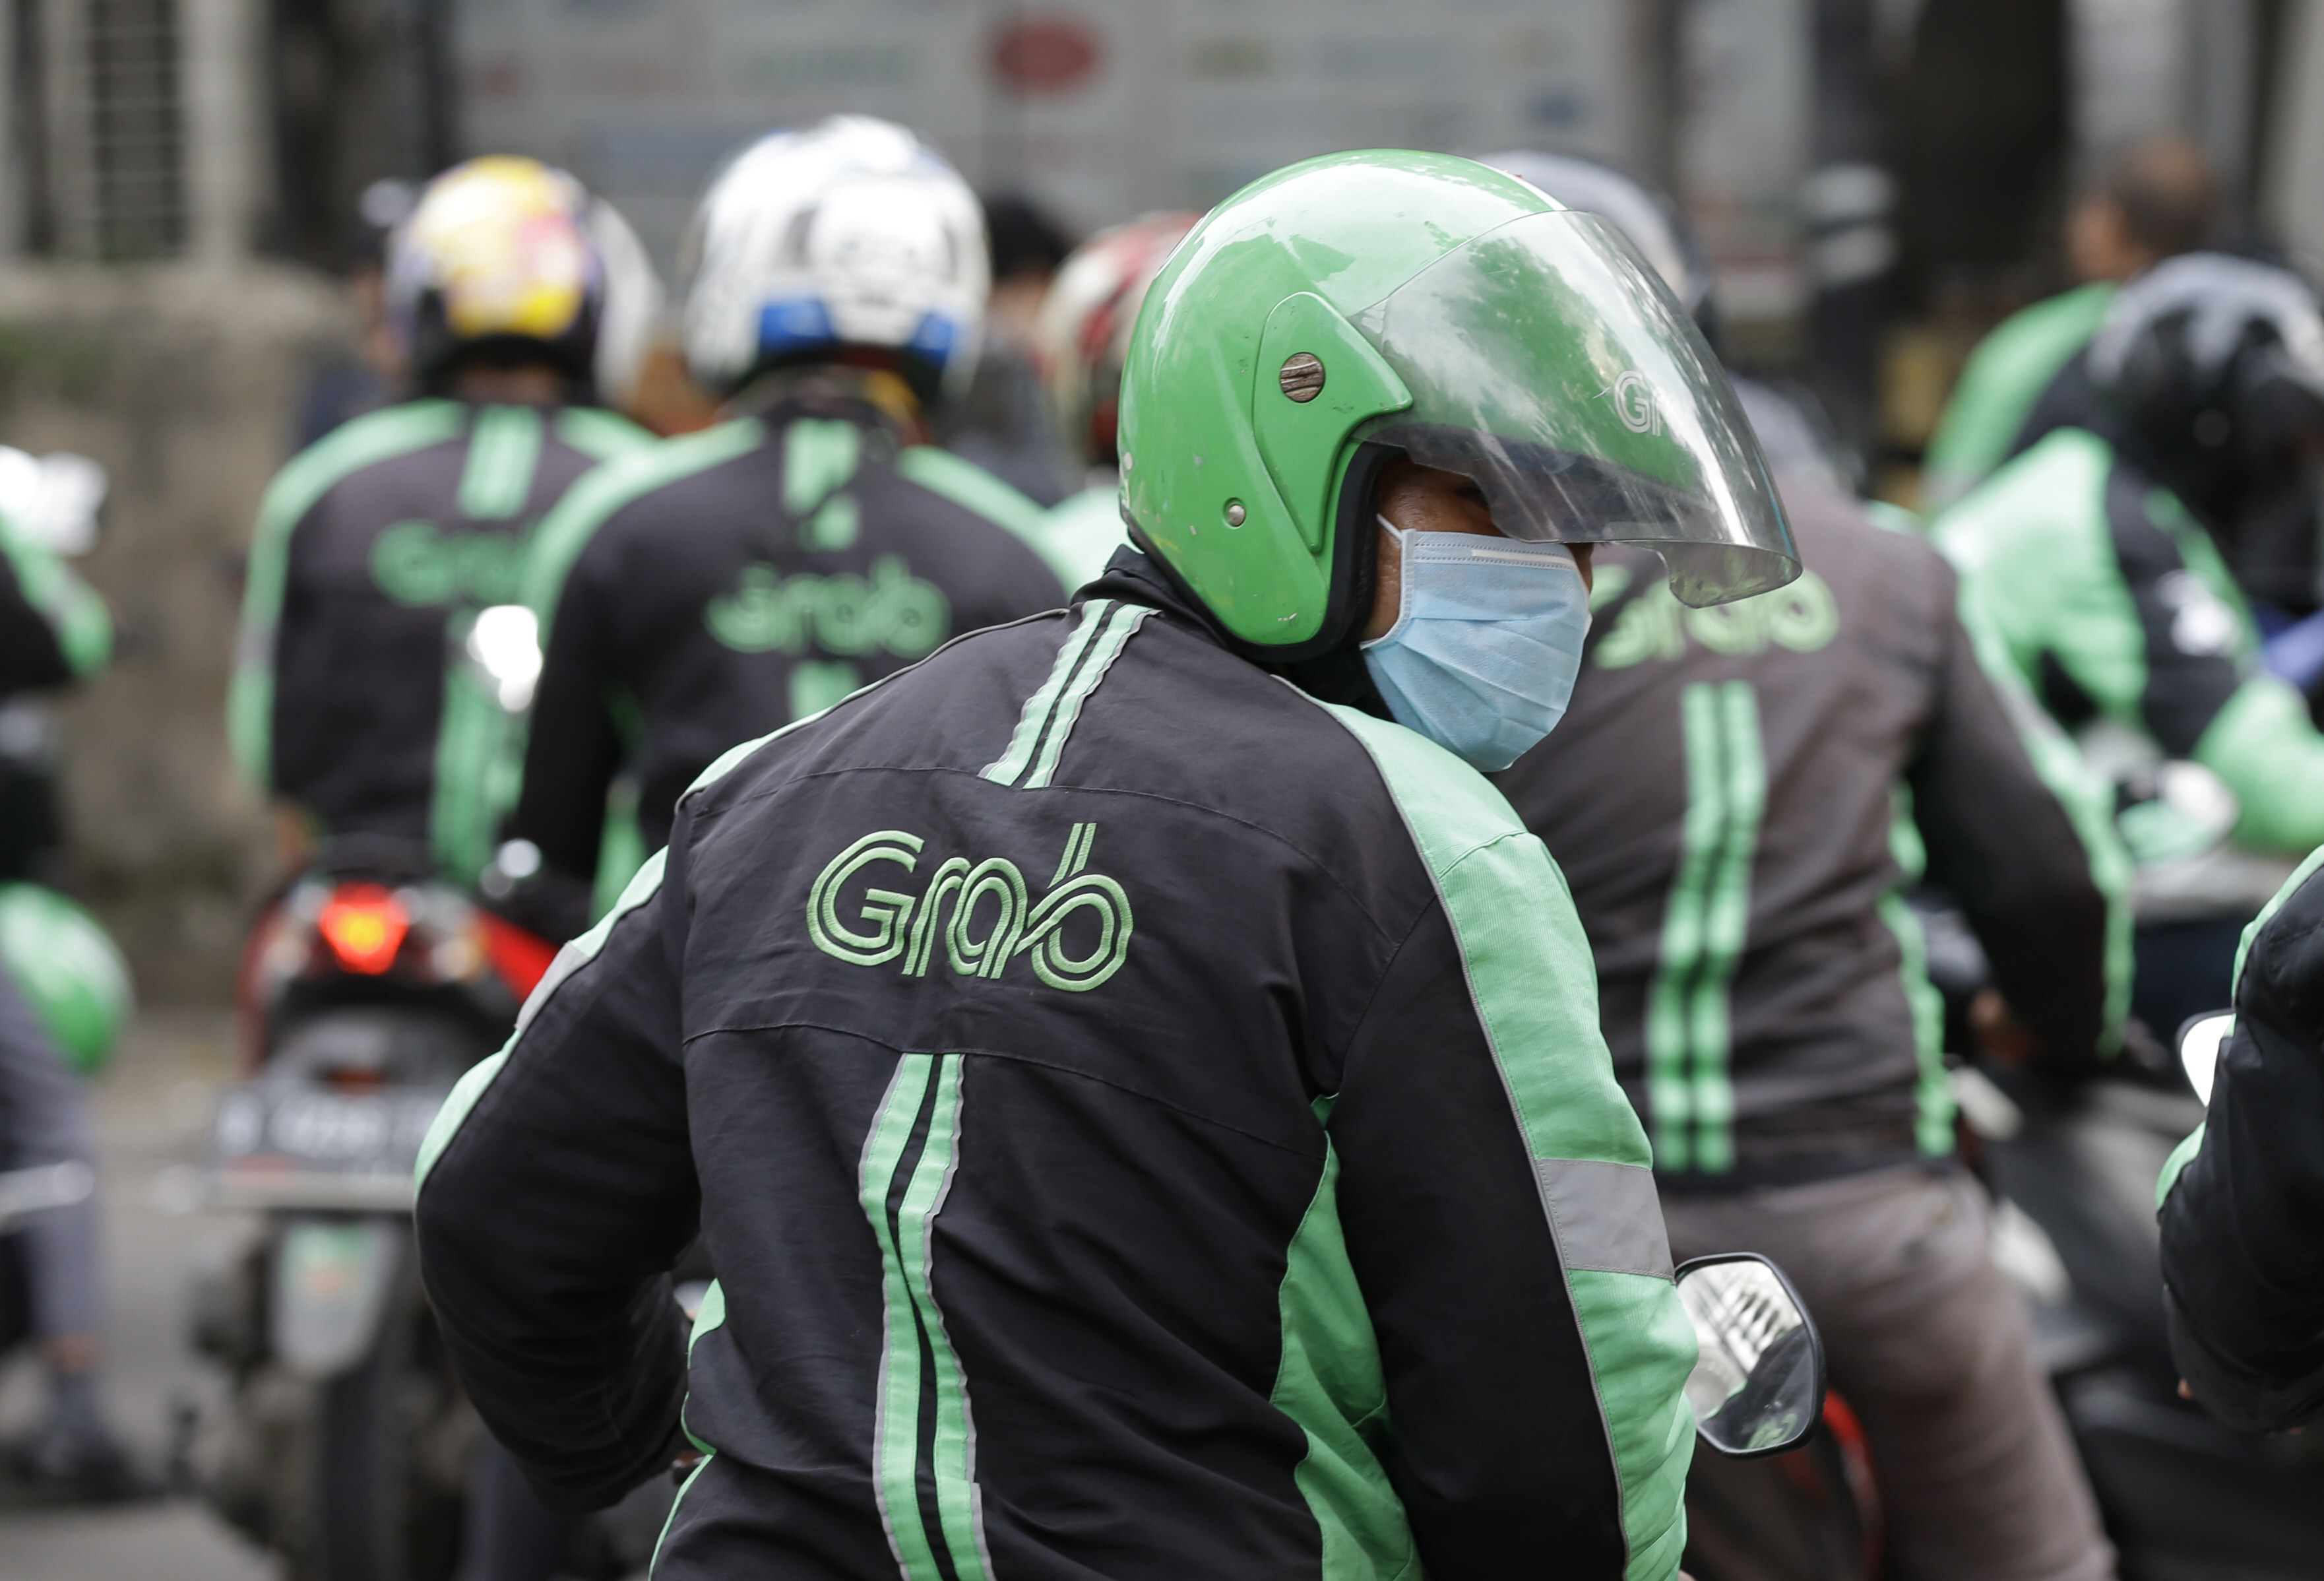 A GrabBike driver in Indonesia in 2018. Grab is set to become the most valuable publicly listed technology company from Southeast Asia following a blockbuster merger with a special purpose acquisition company. Photo: AP 